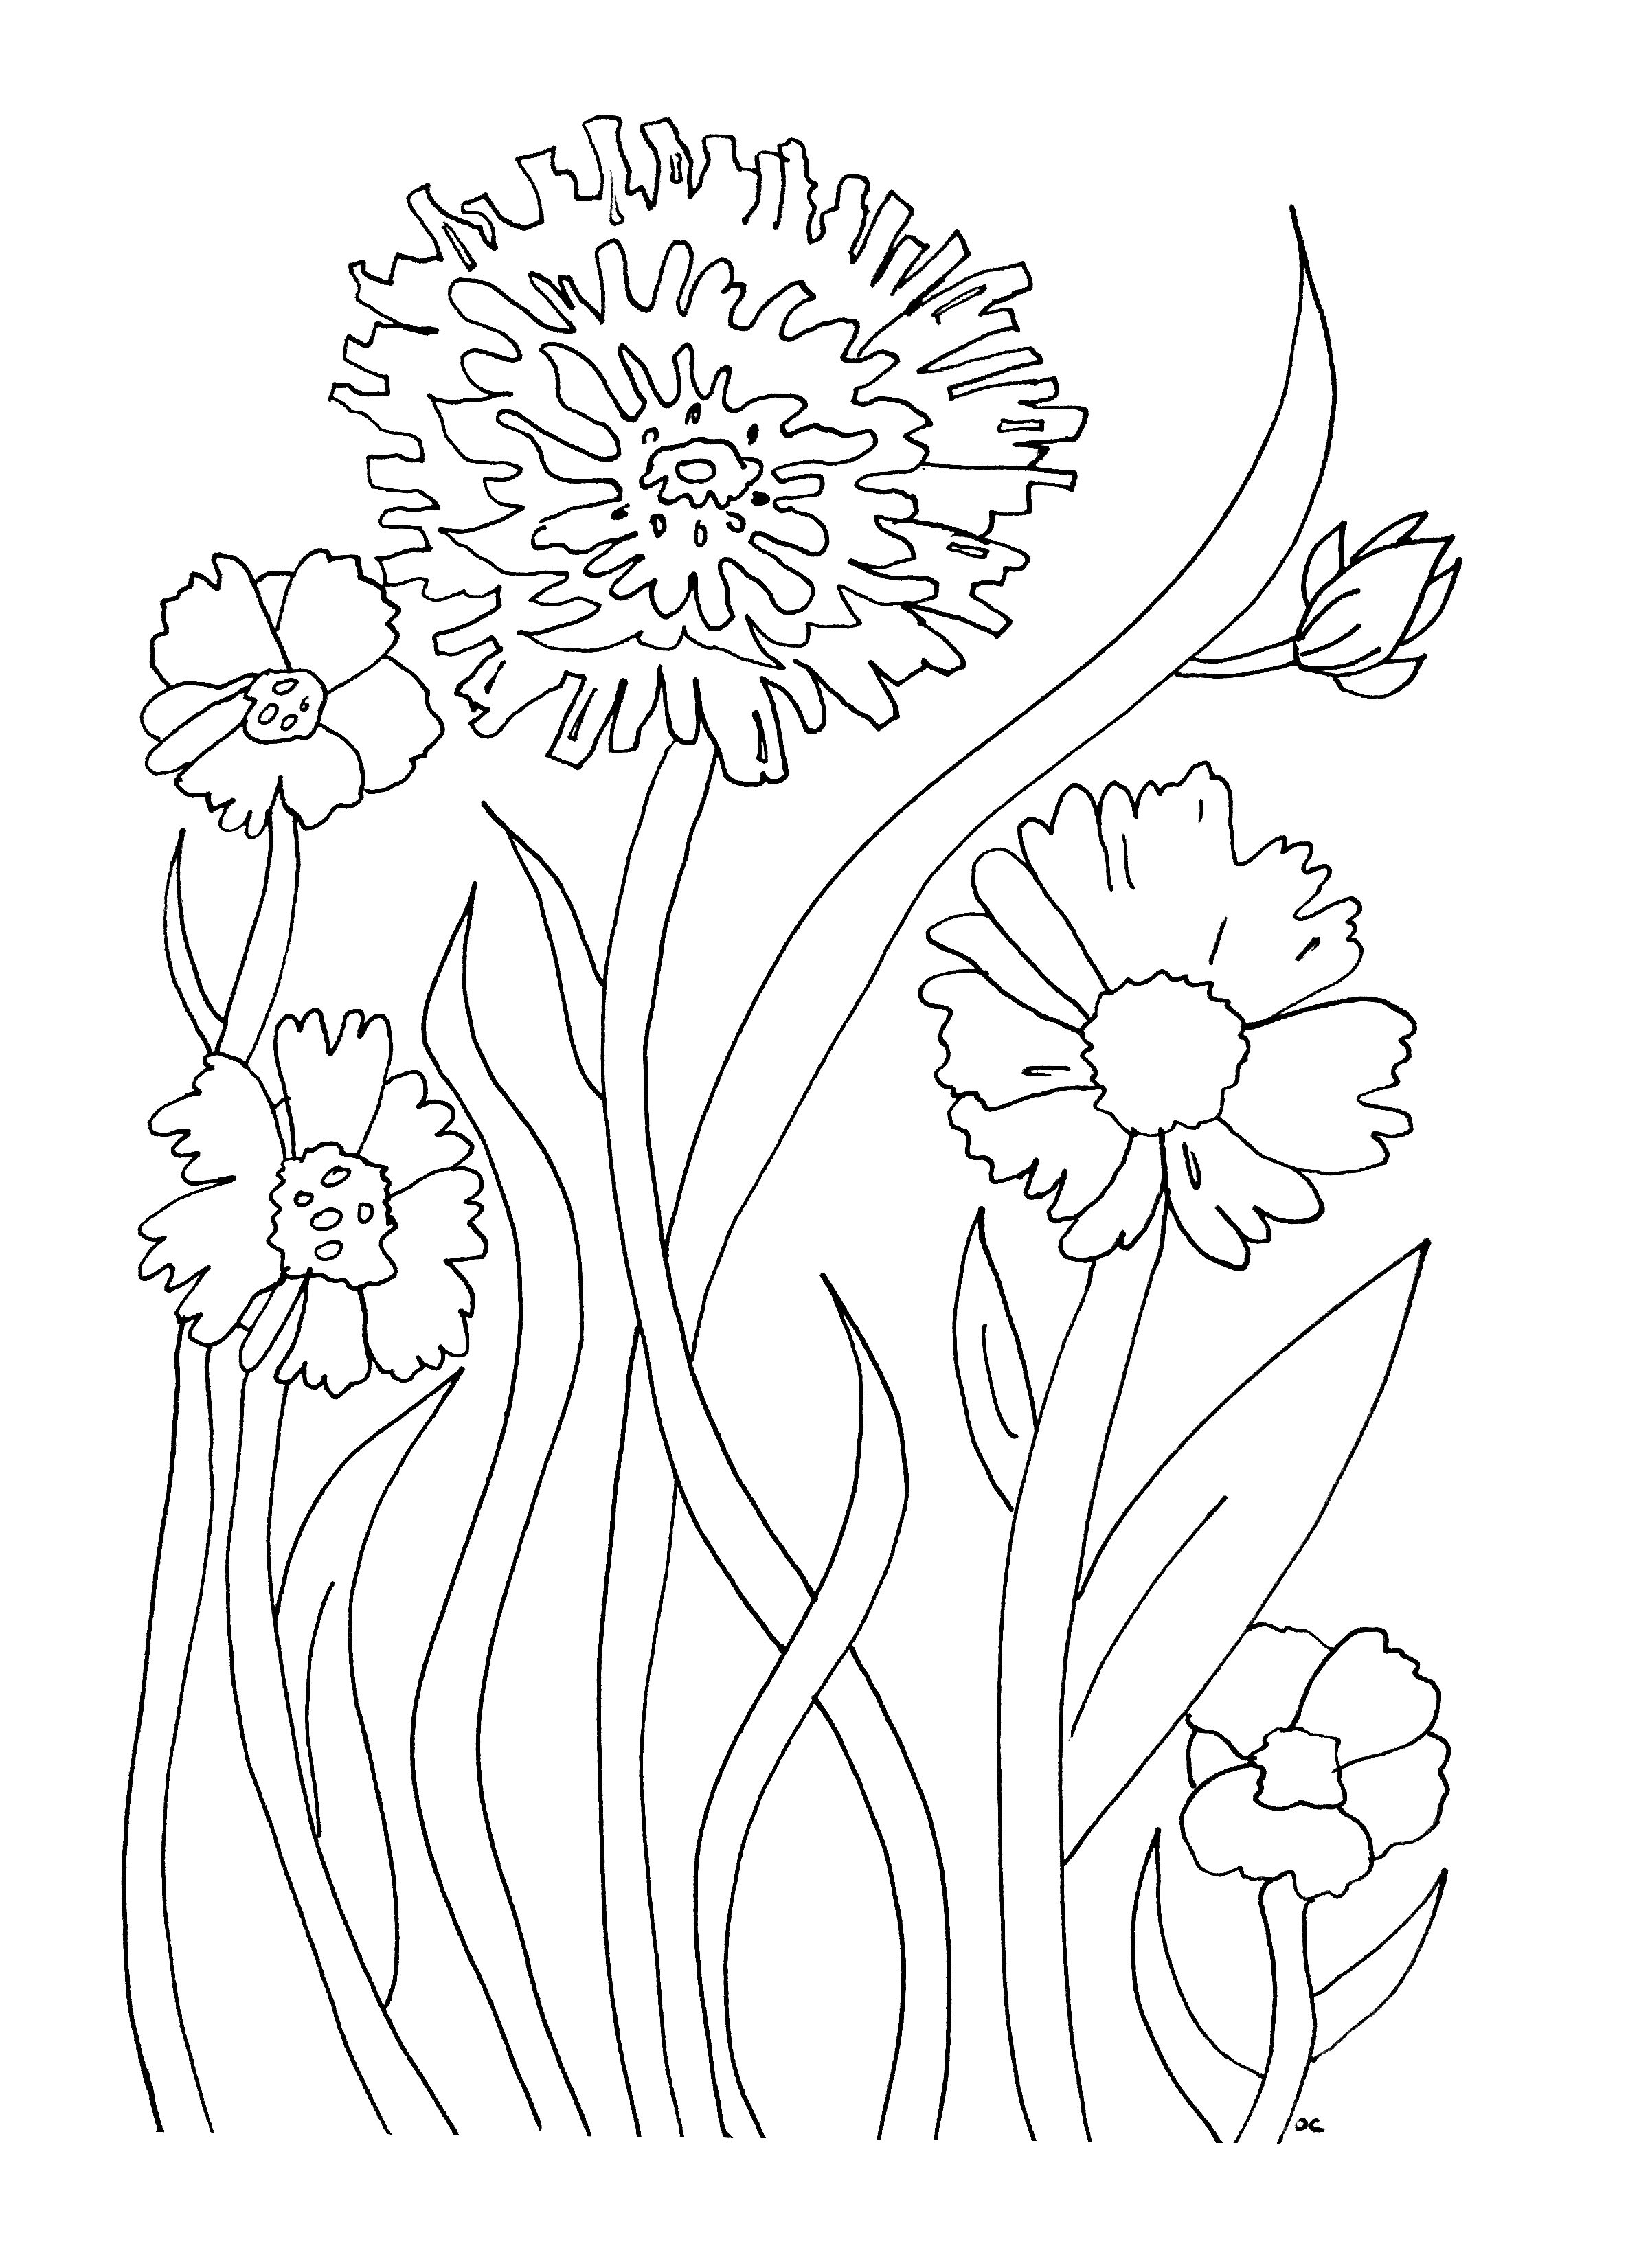 Simple Adult coloring page to download for free